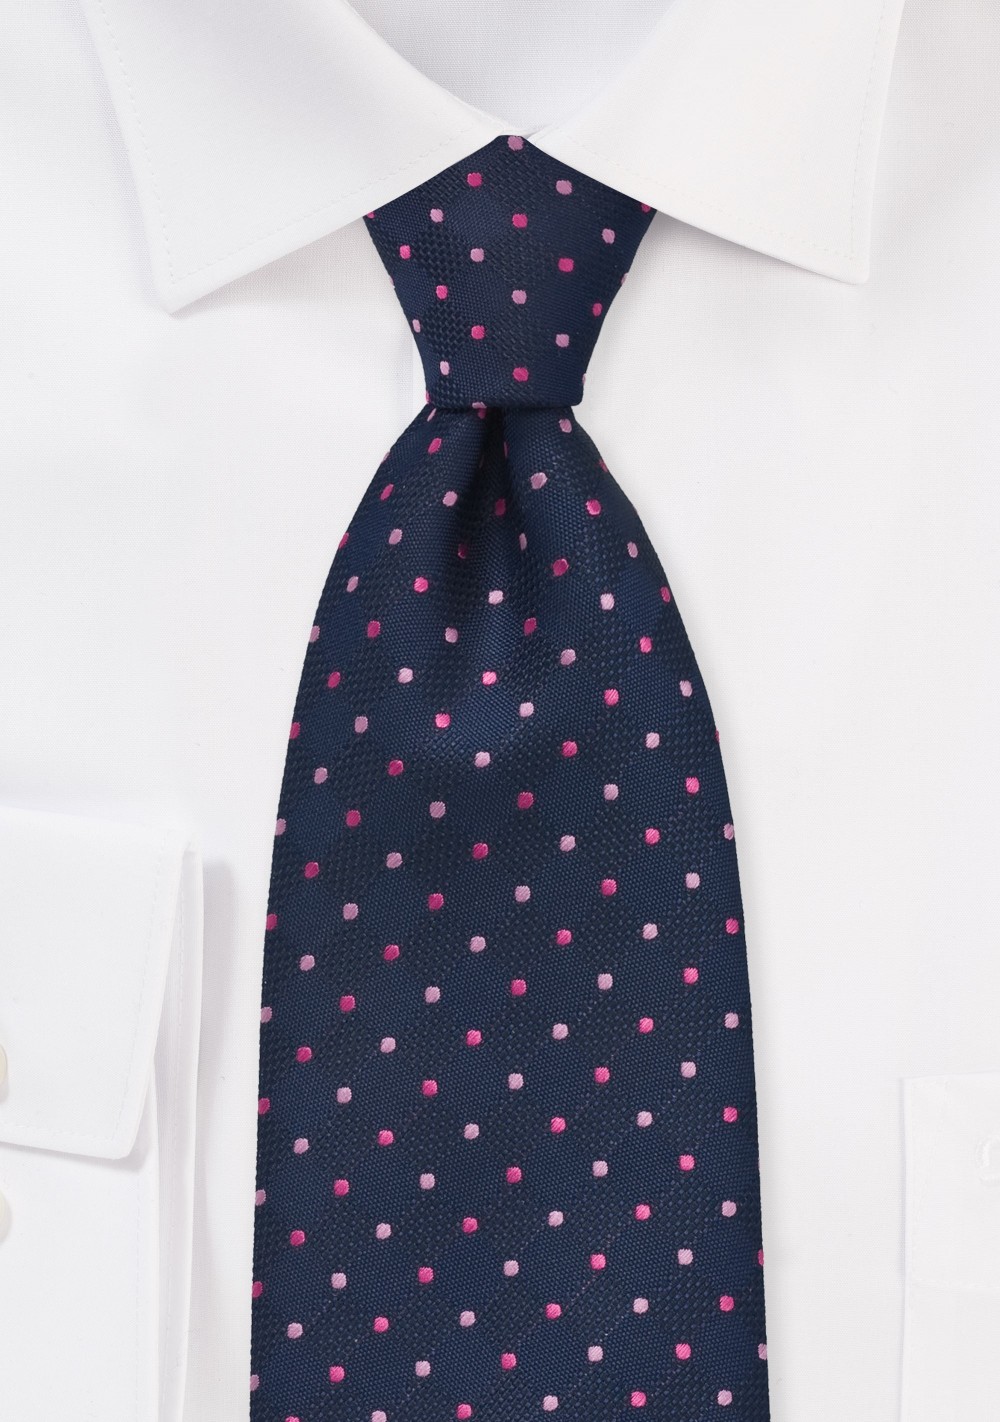 Navy Tie with Pink Polka Dots